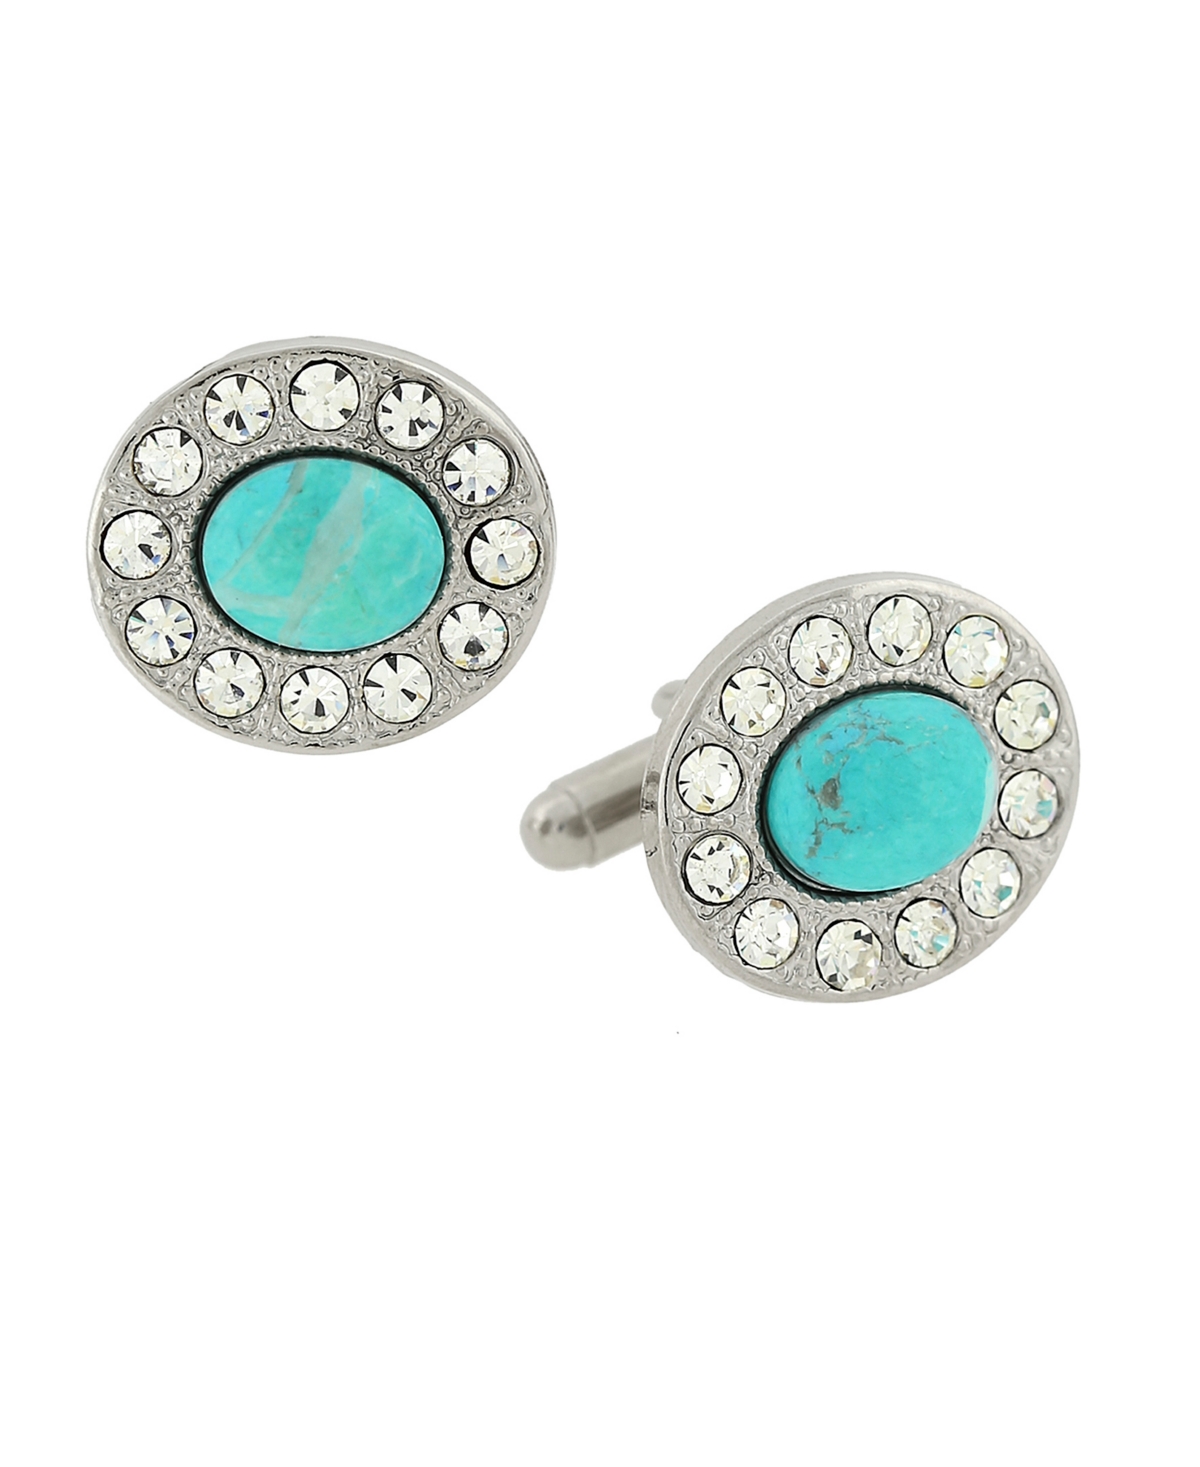 1928 Jewelry Silver-tone Oval Cufflinks In Turquoise